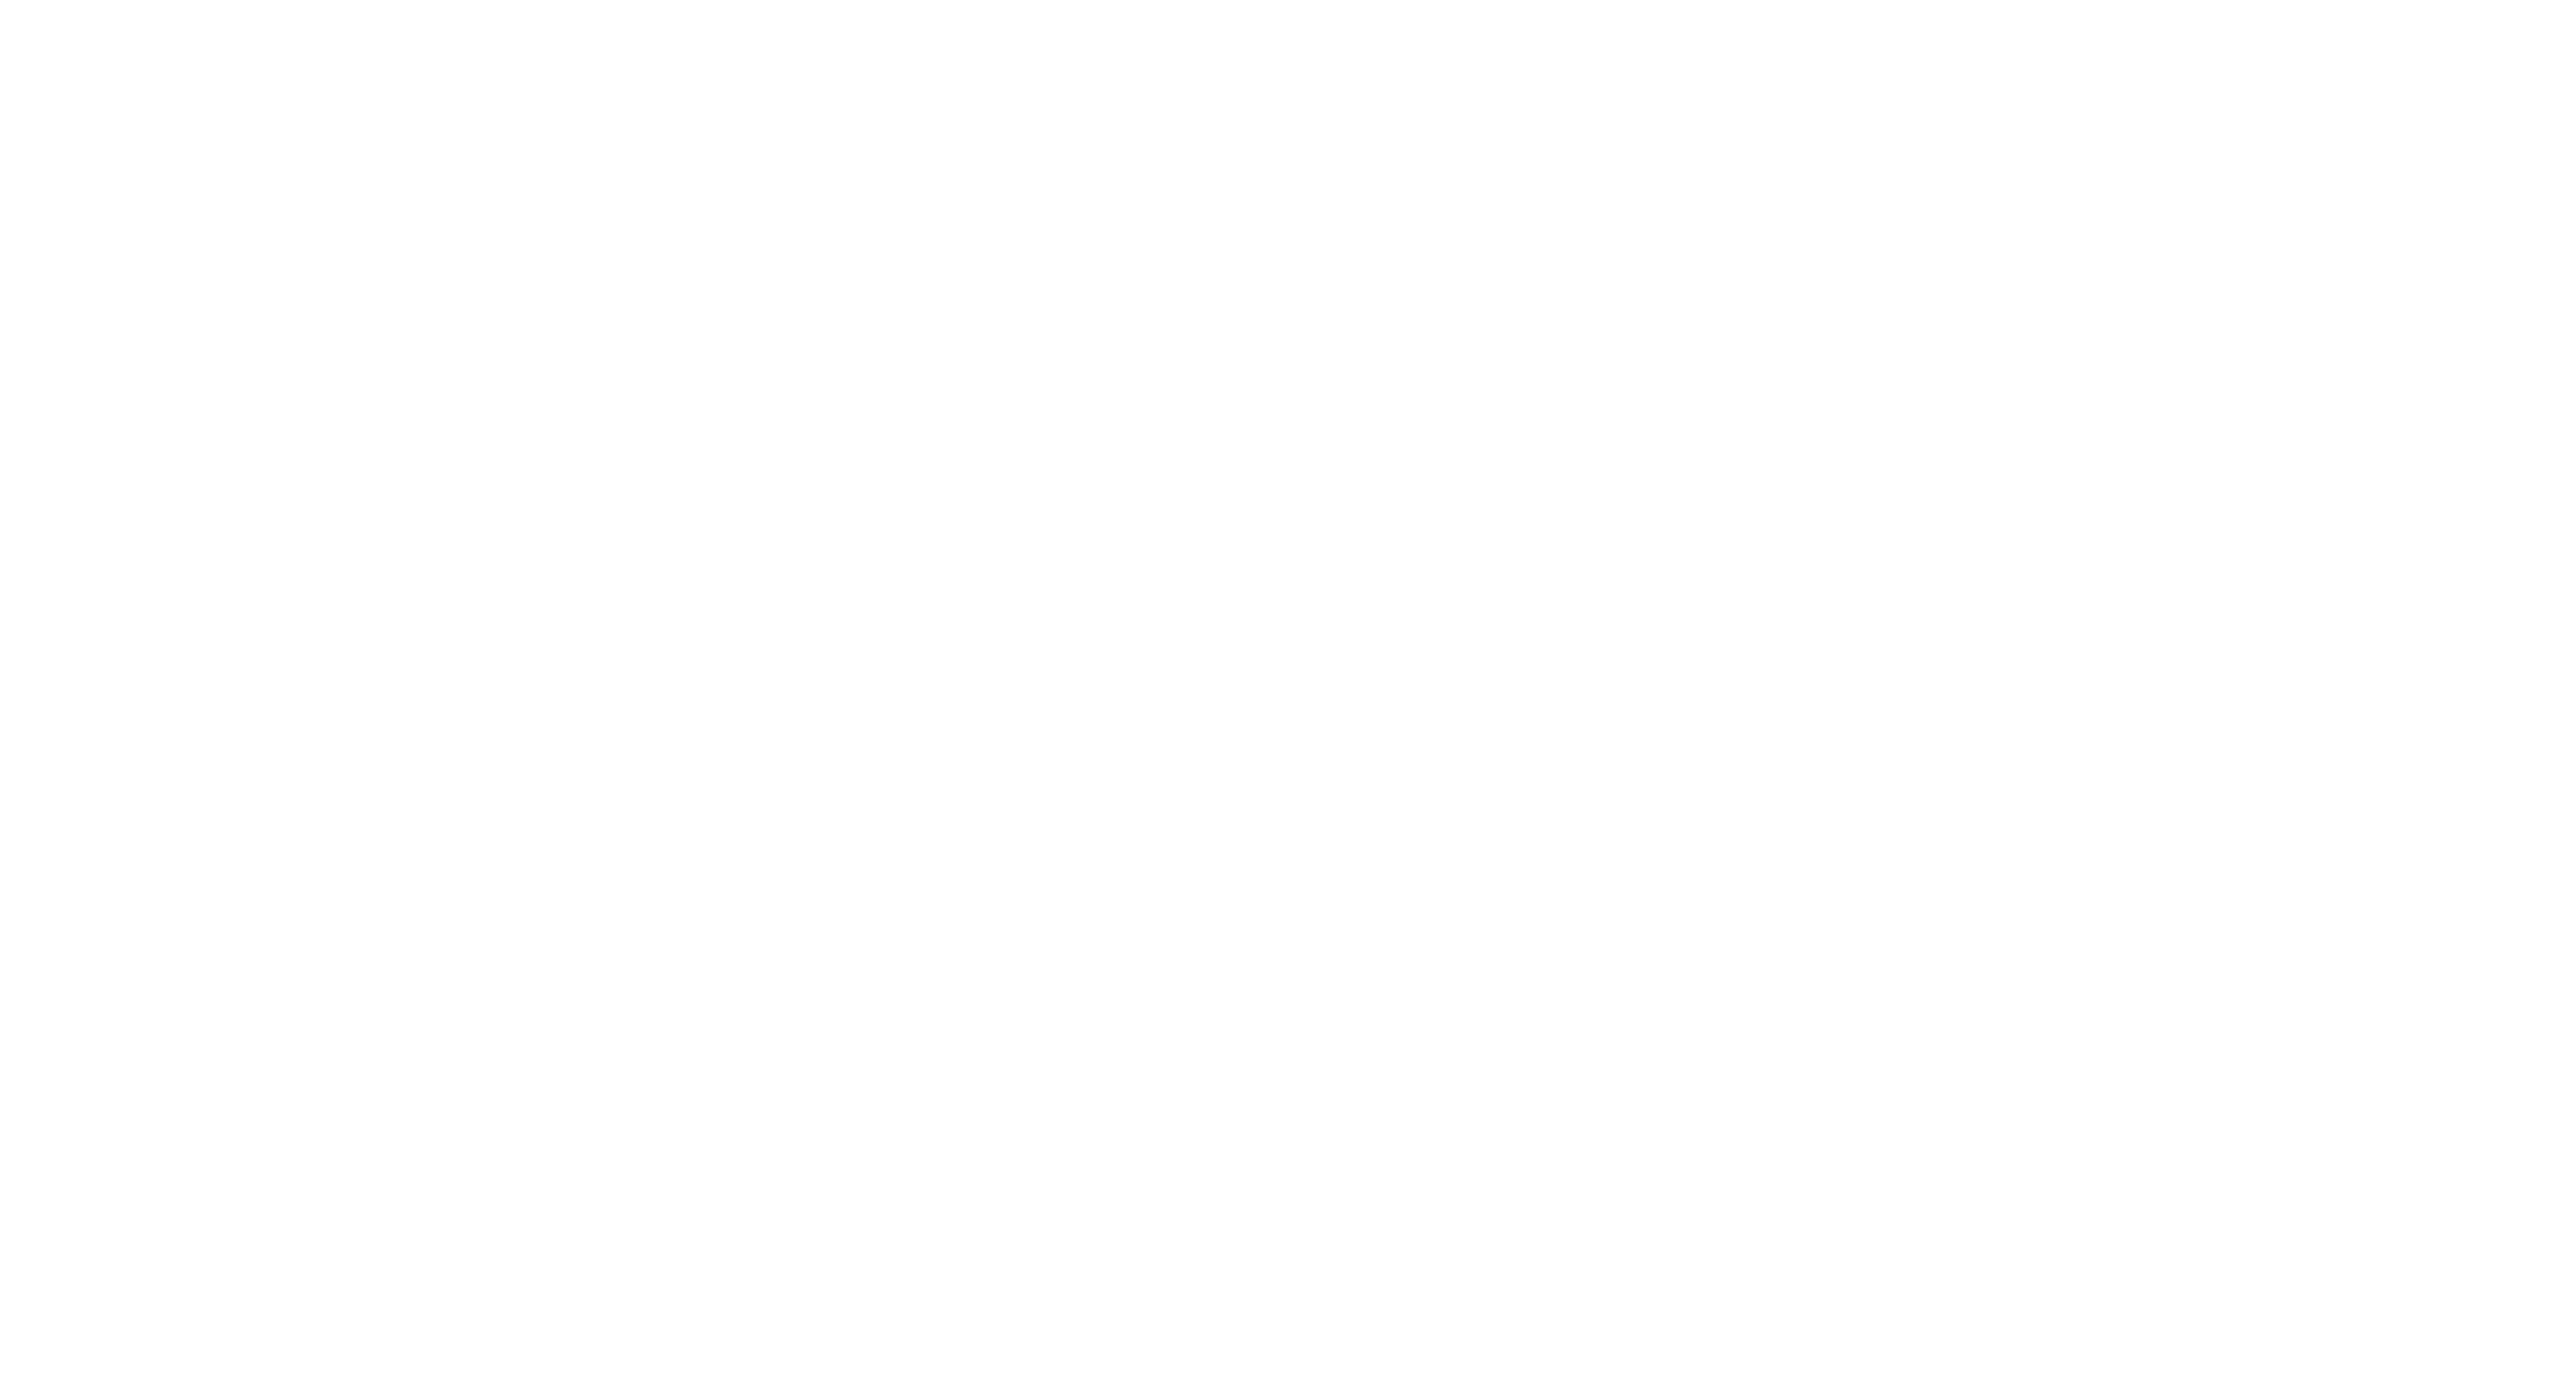 Ivy + Rose Collective